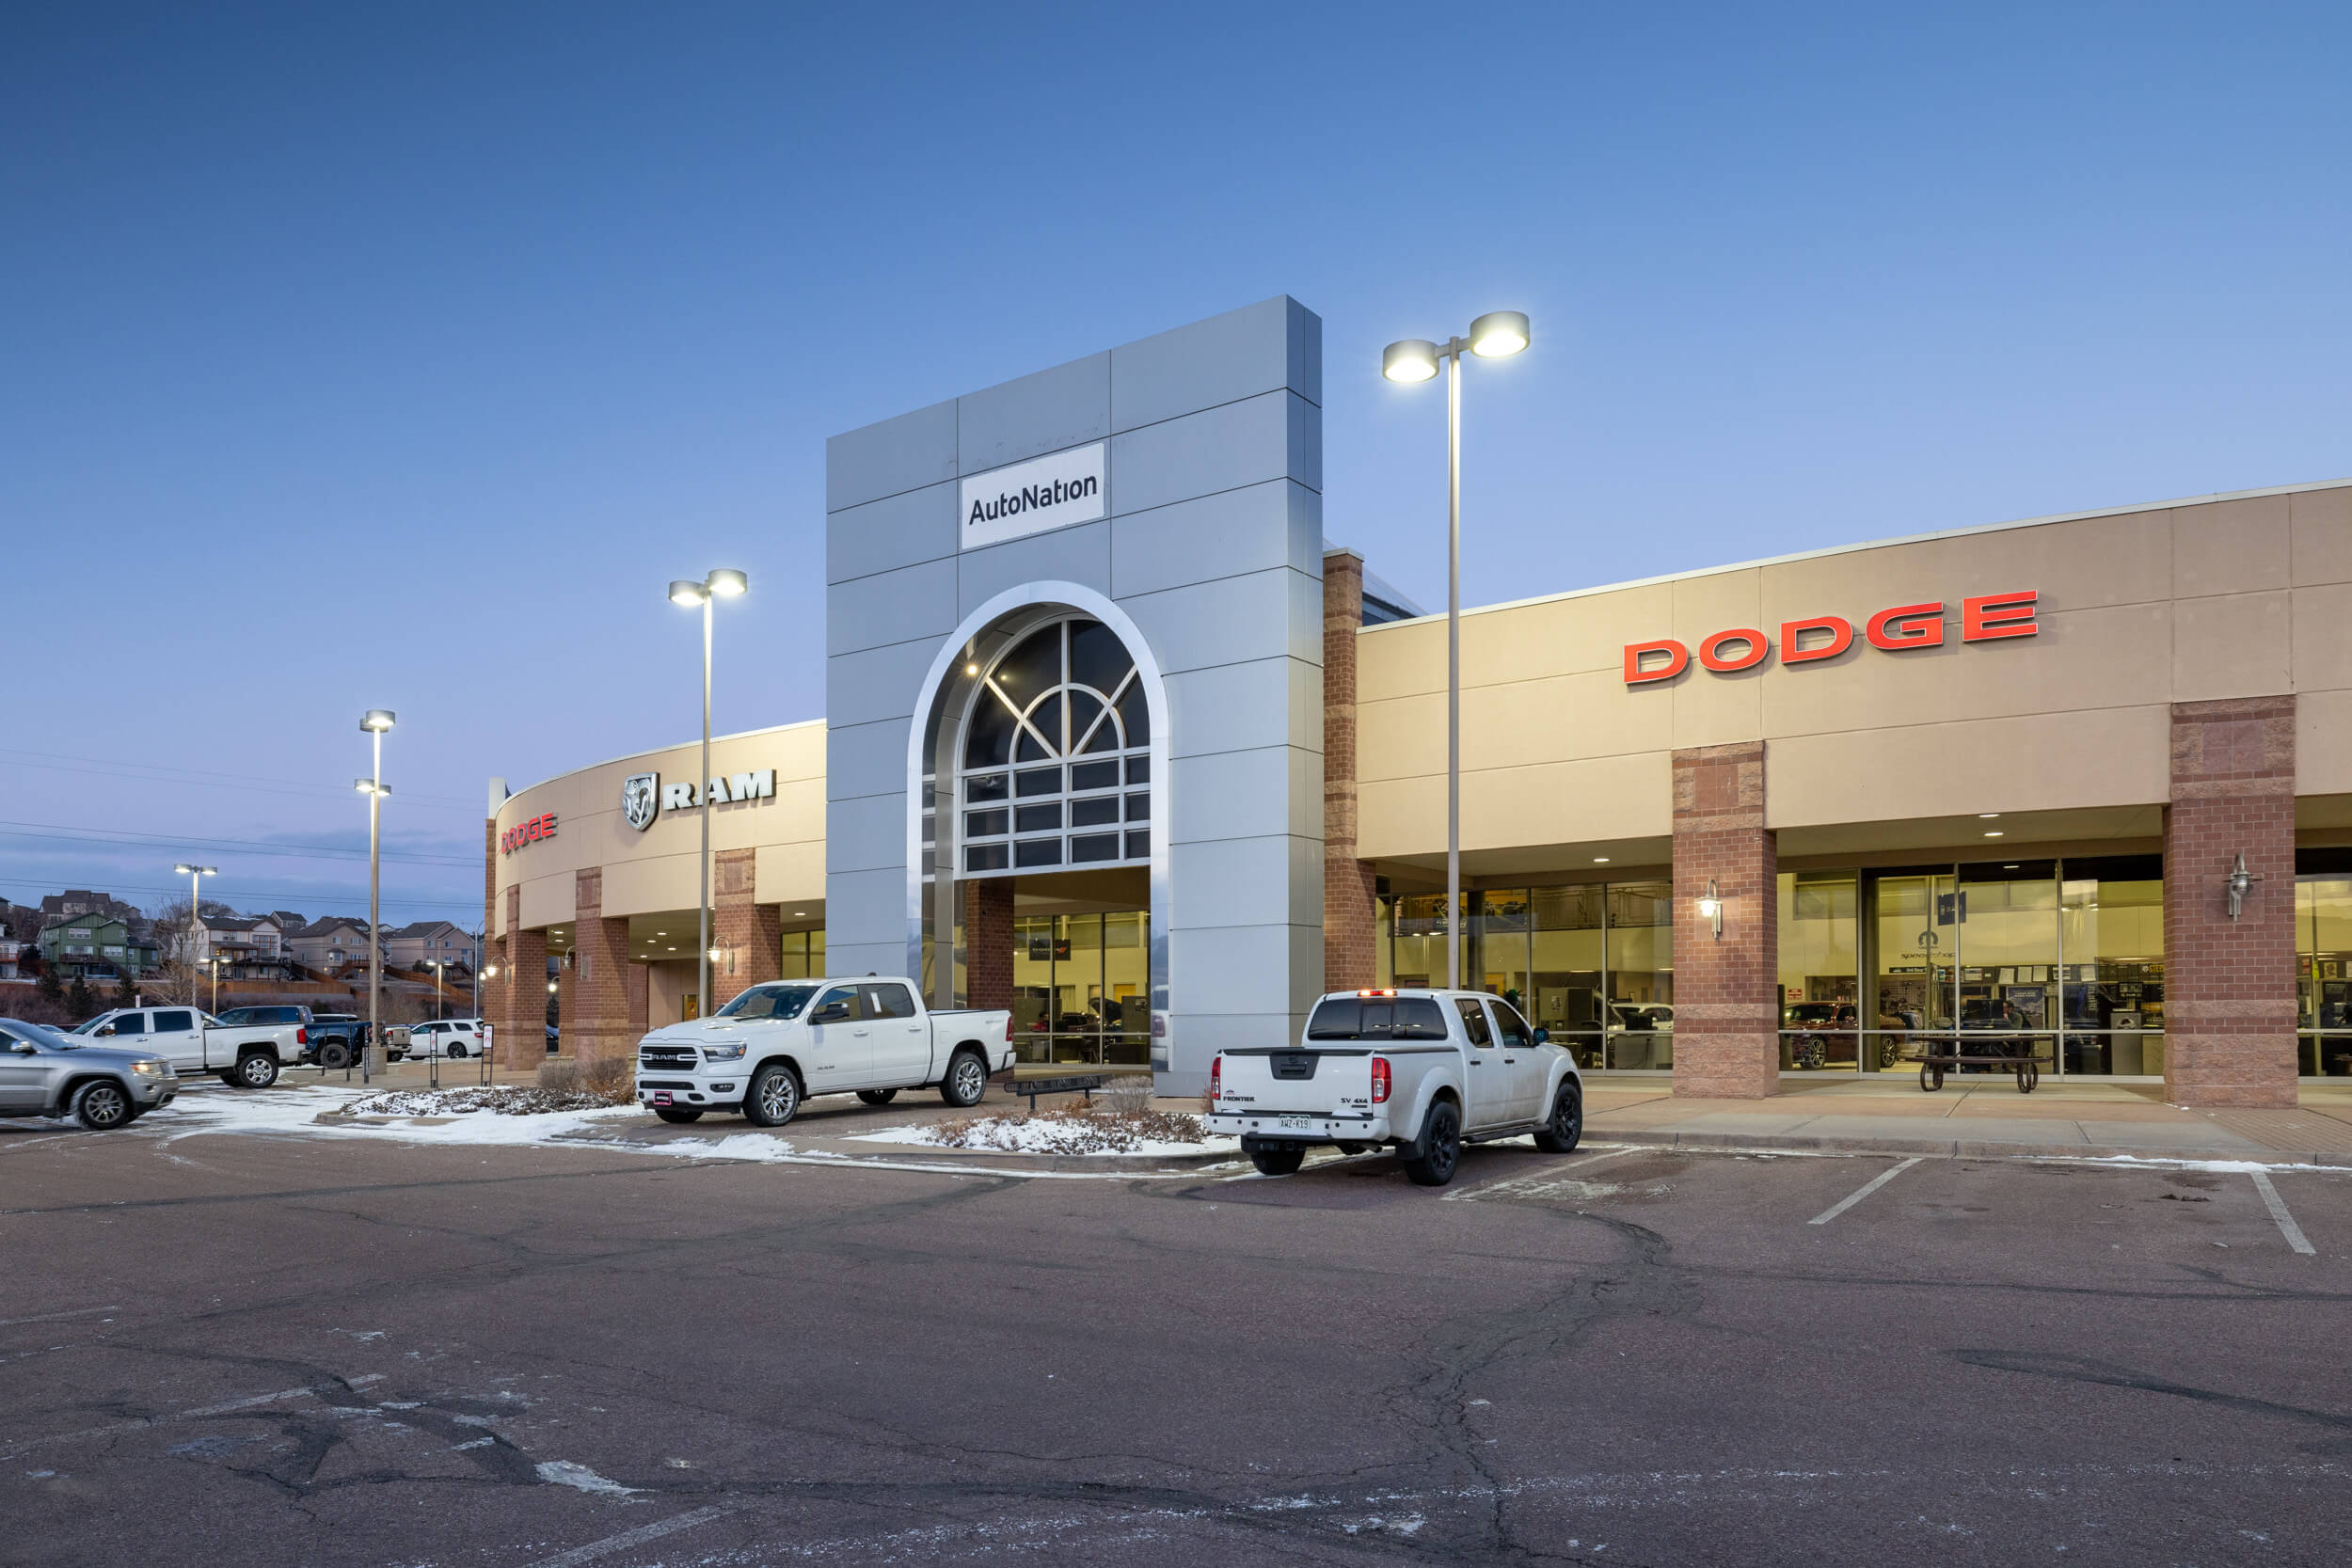 Exterior view of AutoNation Dodge Ram Colorado Springs with some cars parked in front and some snow in the parking lot. Clear sky with and a low light time of day